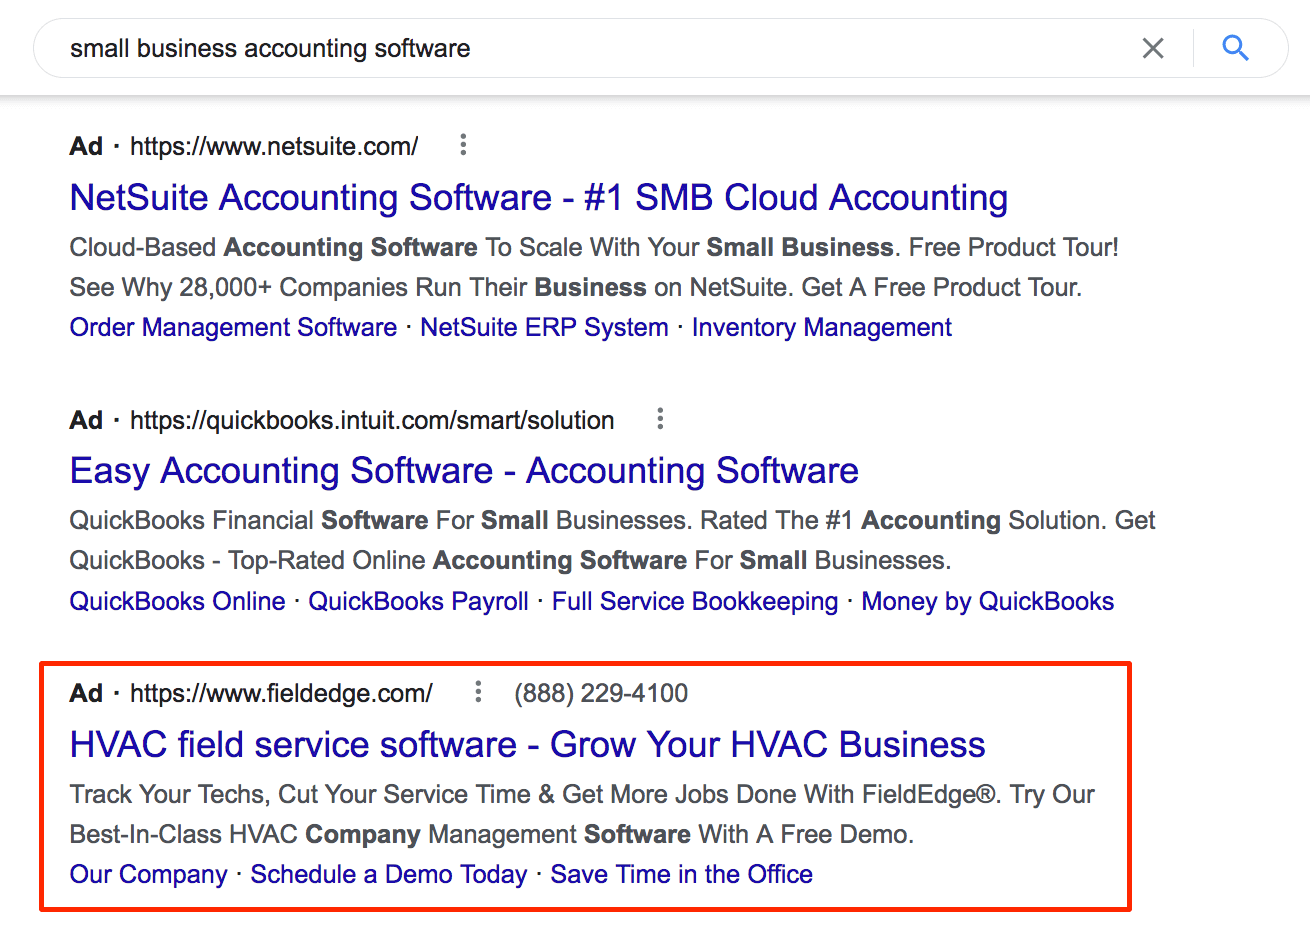 Google search ads for small business accounting software